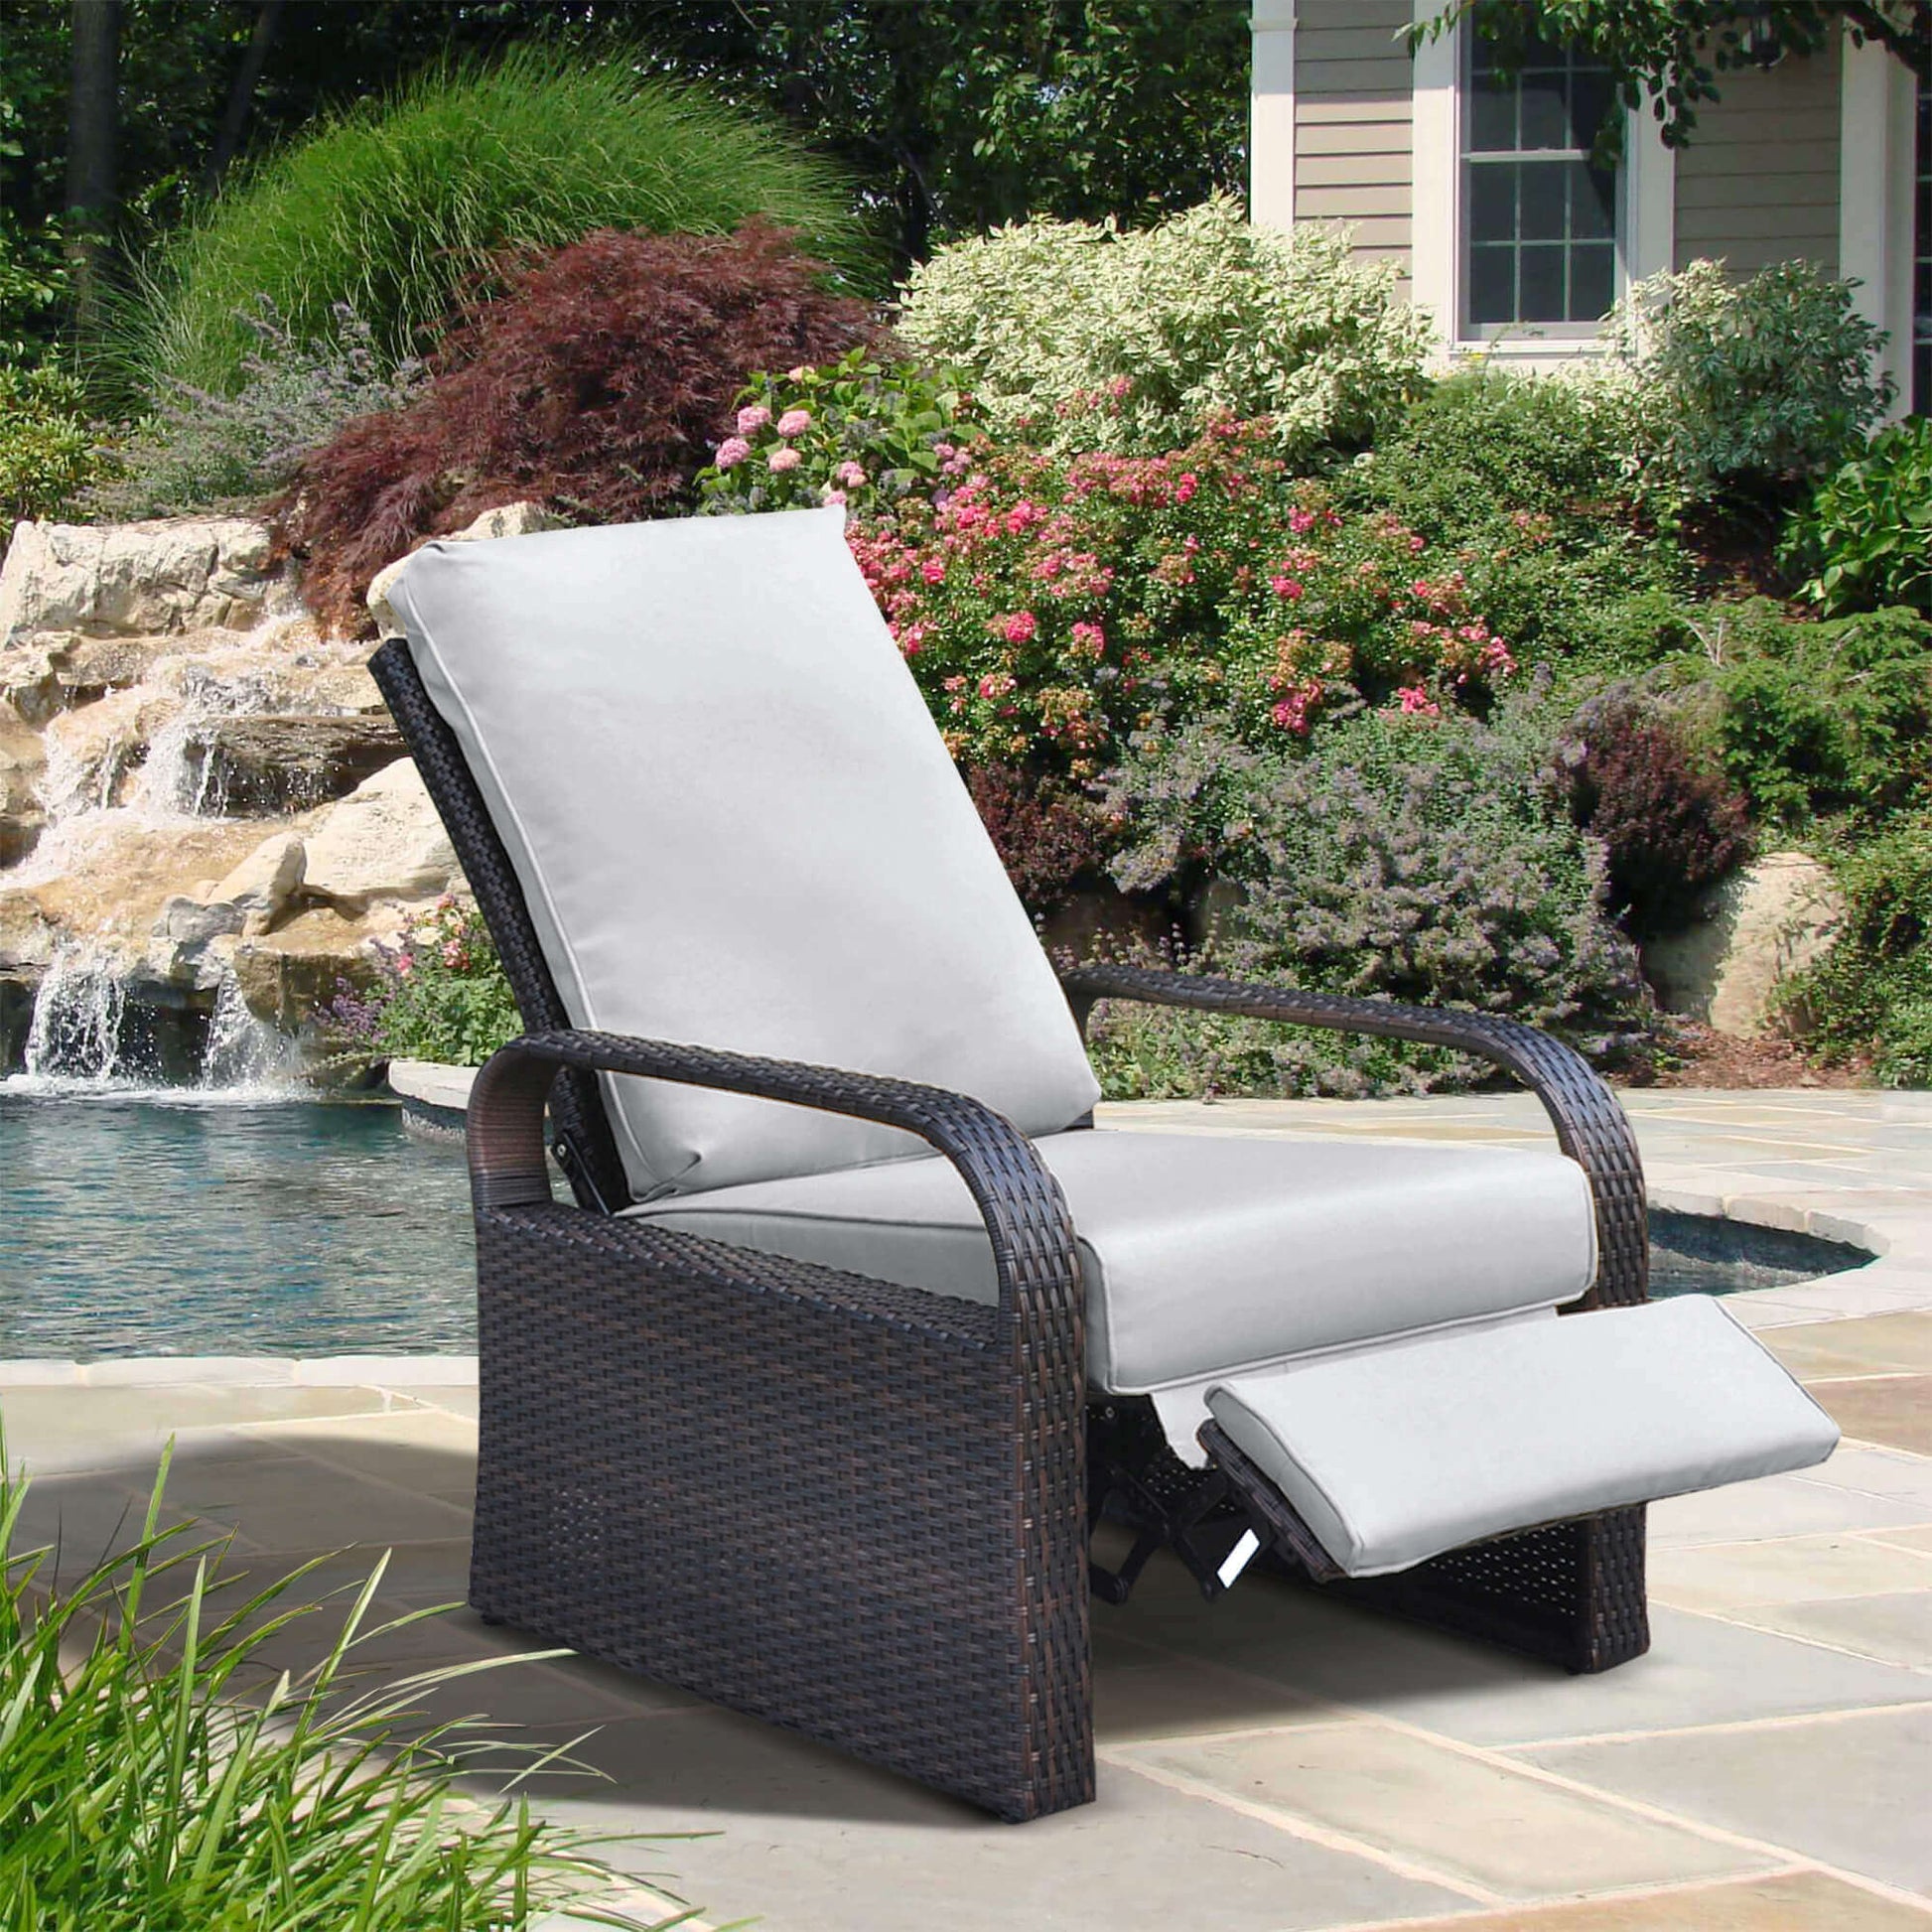 Arttoreal Outdoor Wicker Recliner / Rattan Sofa Recliner / Recliner Chair / Patio Furniture Single Armchair Chair with Cushion